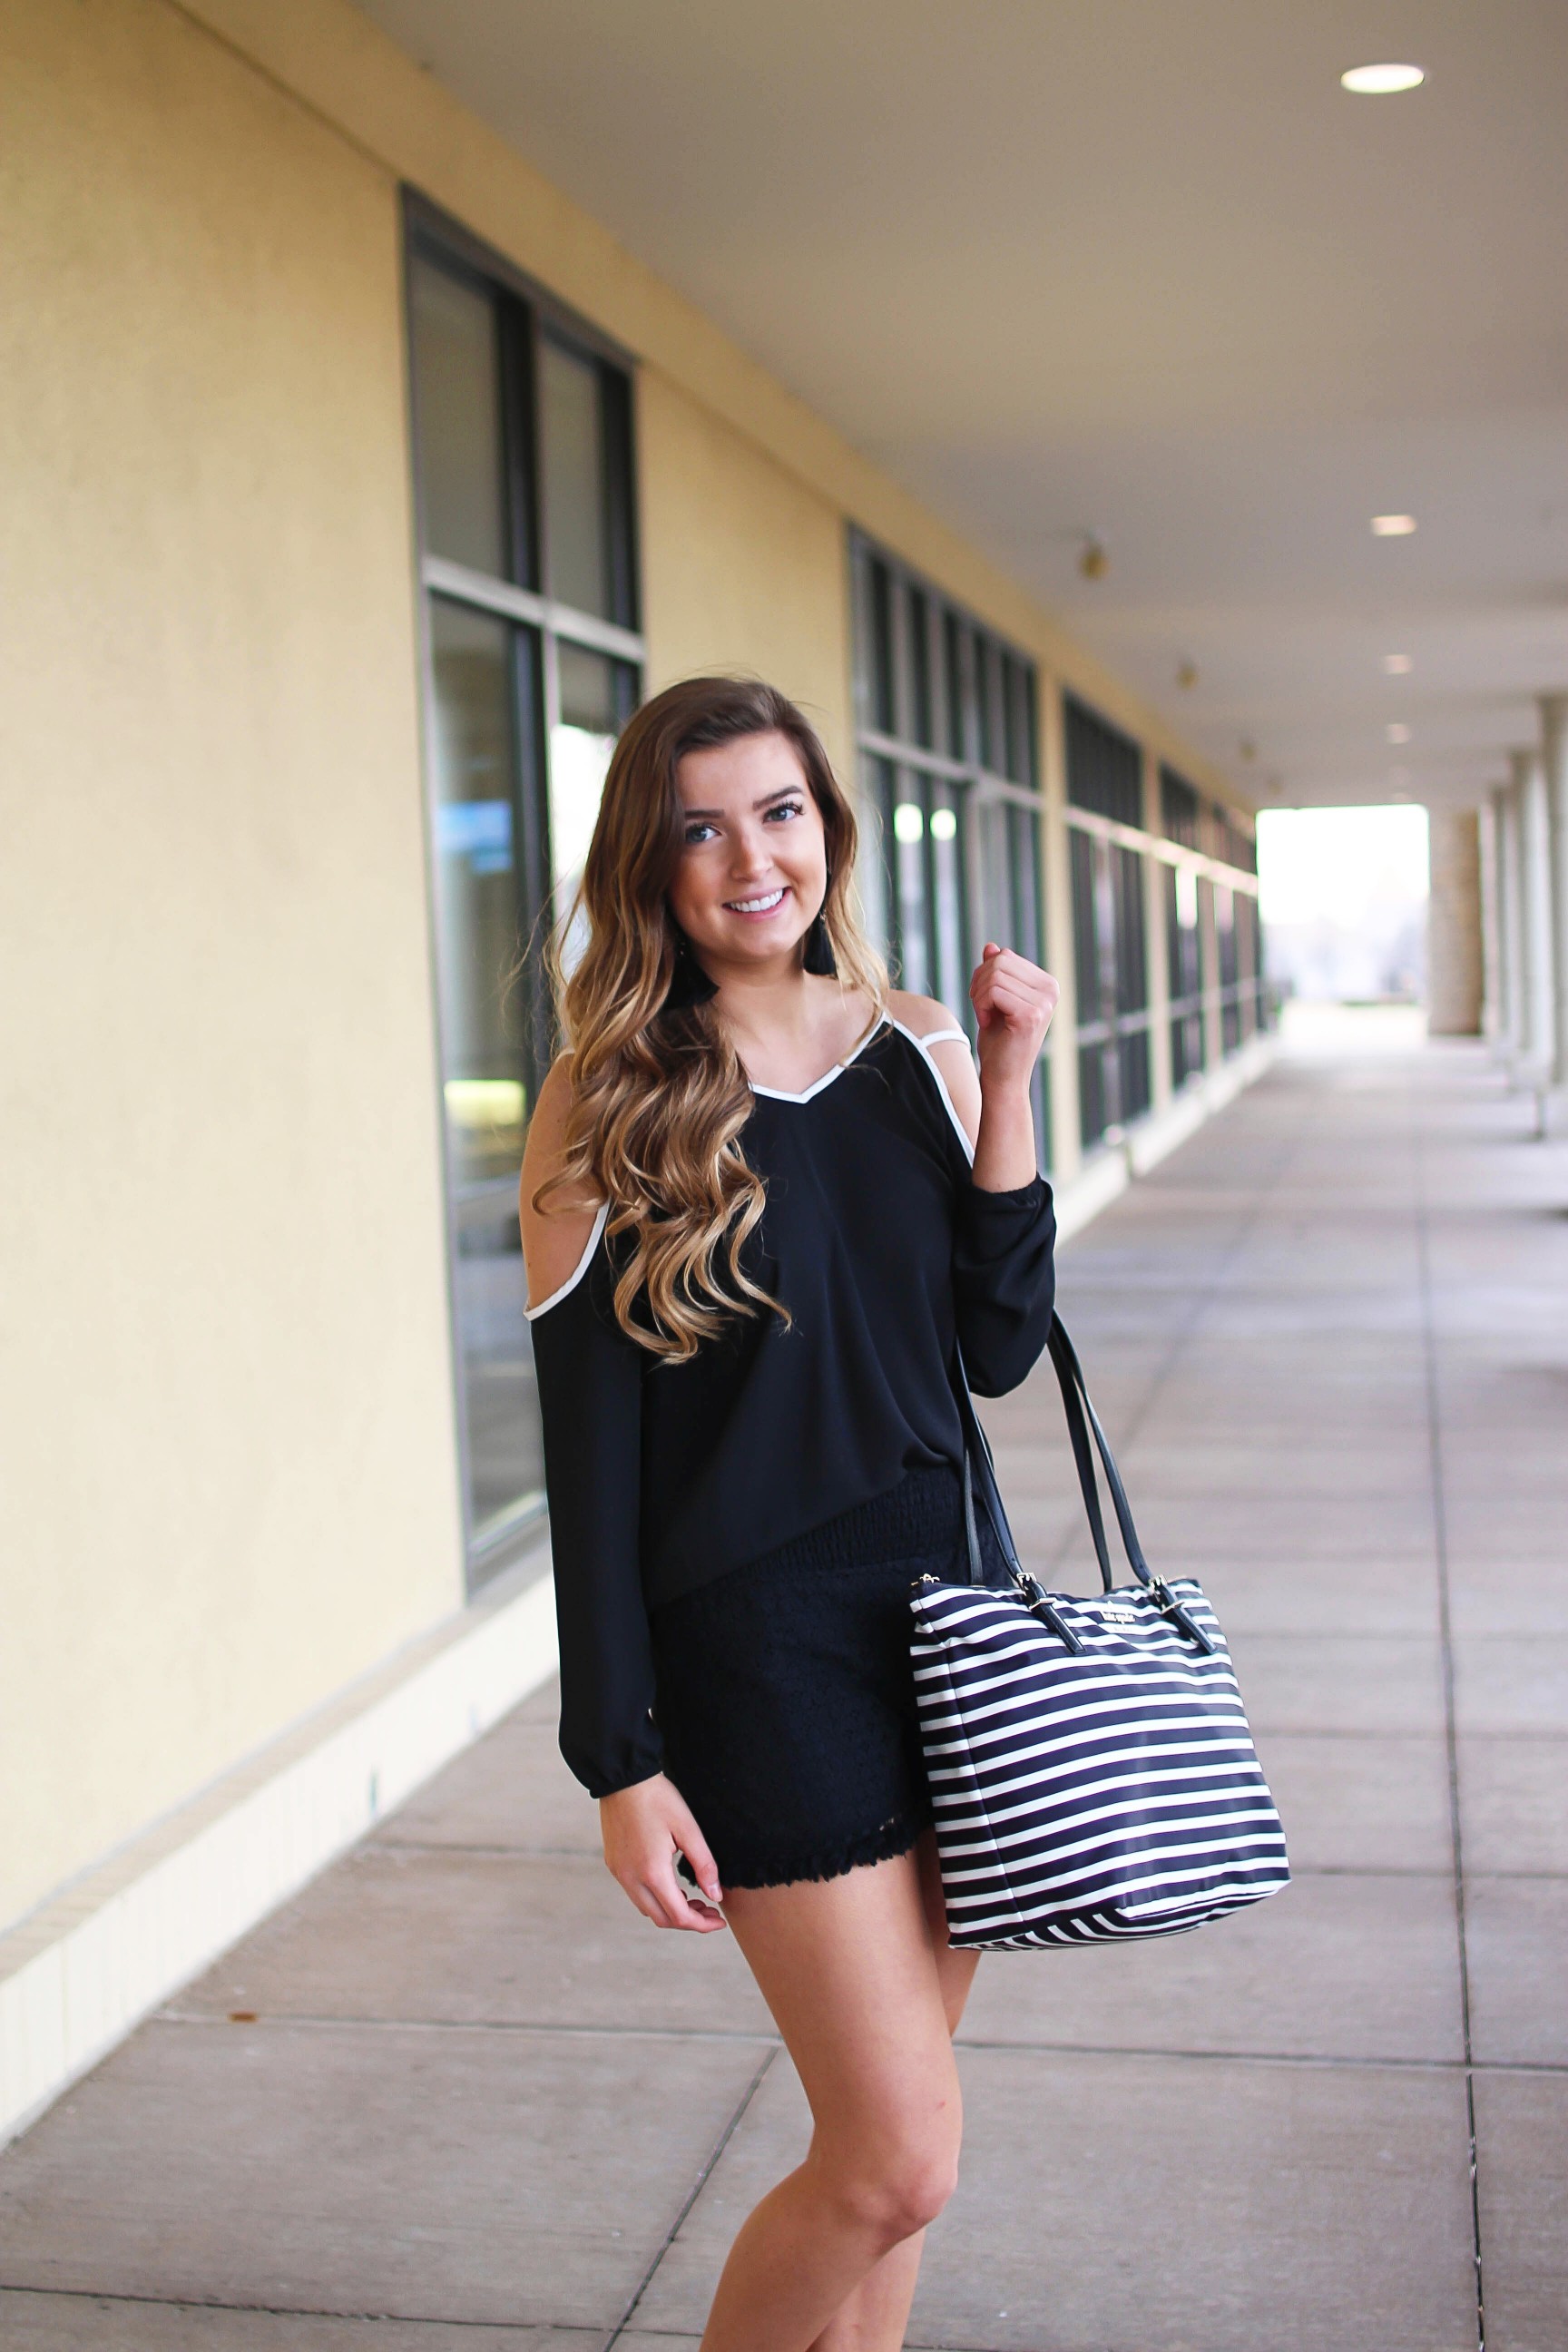 Black and white outfit! I love this black cold shoulder top with the white trim detail! I paired ti with some comfy black cotton shorts and my new black and white striped Kate spade tote! To finish off the outfit I put on my tassel earrings that are only $12! By Lauren Lindmark on Daily Dose of Charm dailydoseofcharm.com